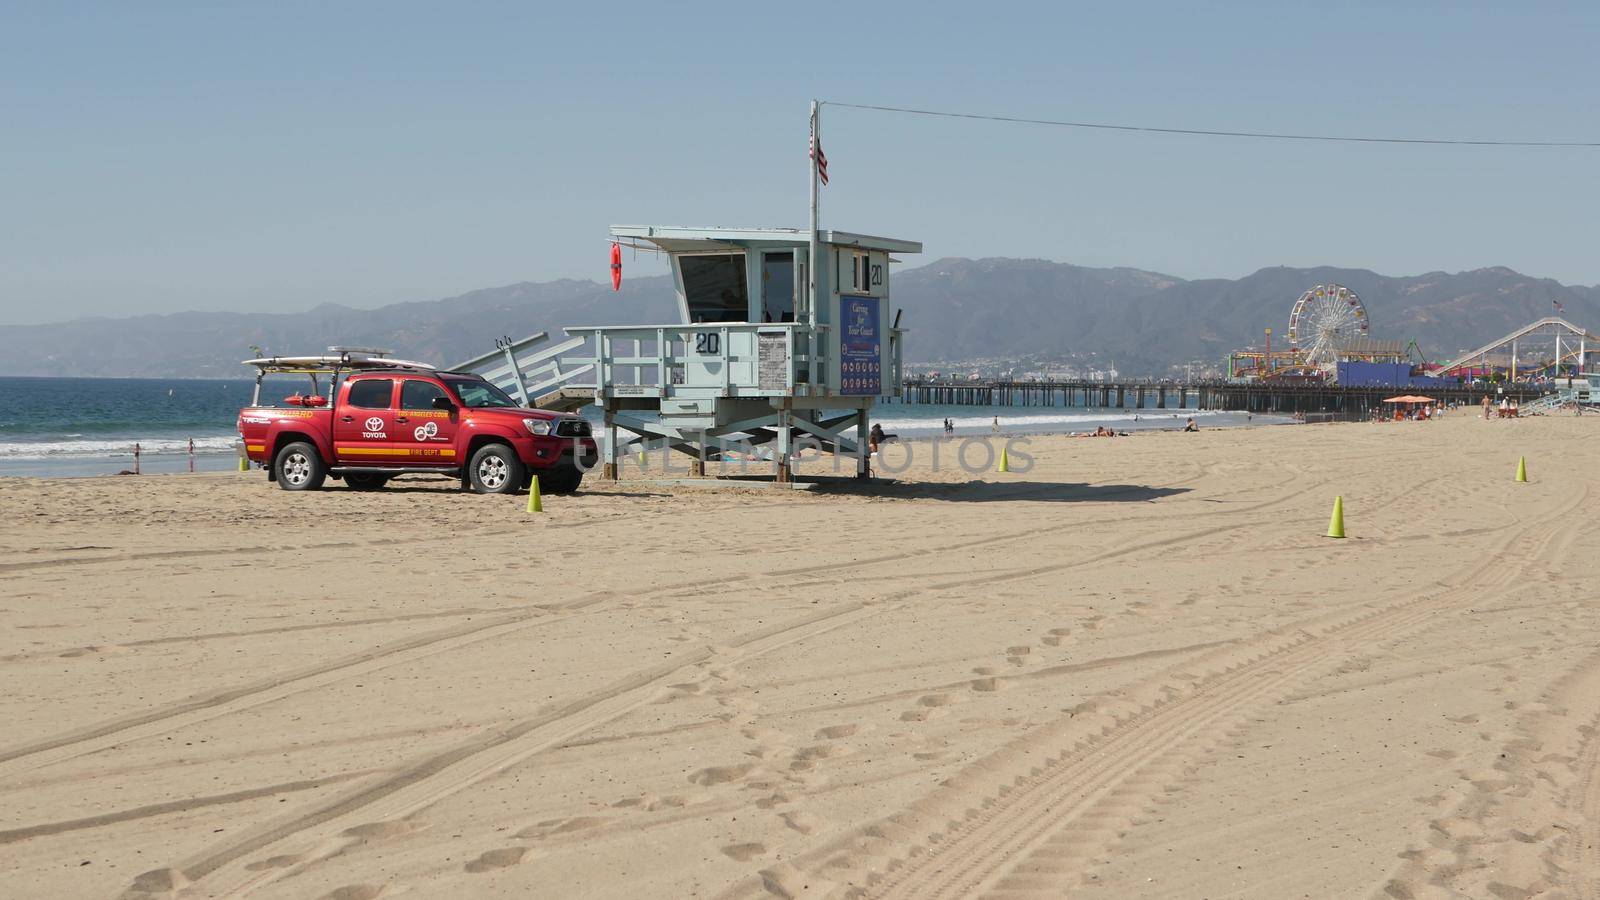 SANTA MONICA, LOS ANGELES CA USA - 28 OCT 2019: California summertime beach aesthetic. Iconic blue wooden watchtower, red lifeguard car on sandy sunny coast. Amusement park and attractions on the pier